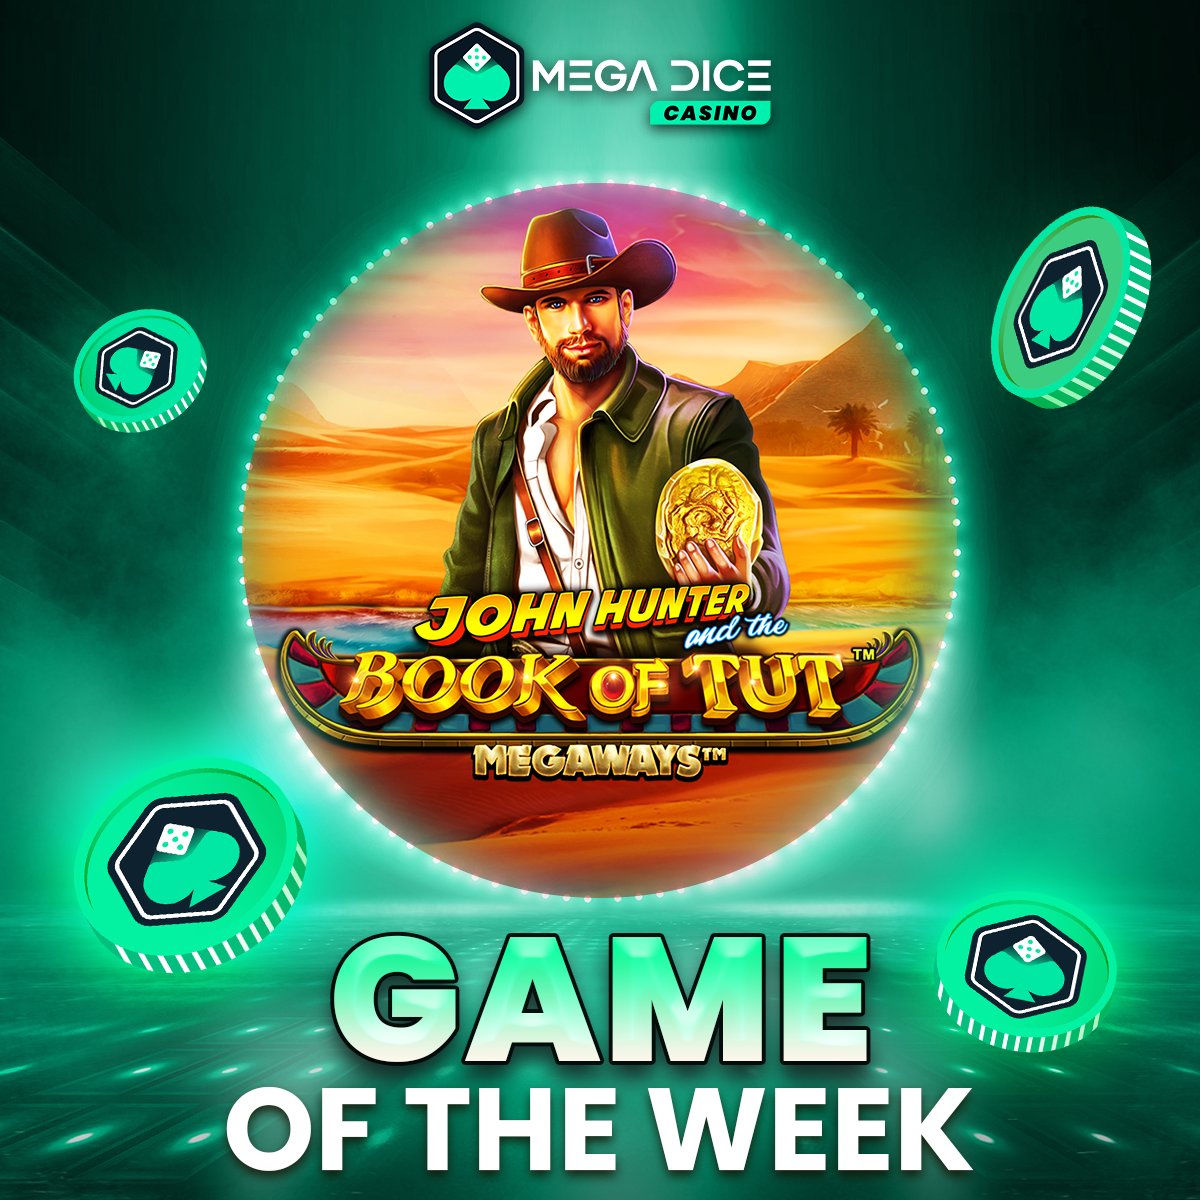 🎰 #GameOfTheWeek: #BookOfTutMegaways by @PragmaticPlay 📜

Join our daring explorer, John Hunter as he delves into the mysteries of Ancient Egypt! 🔍

Uncover hidden treasures at Mega Dice Casino now 💰 

🔗 megadice.com/en/casino/prag…